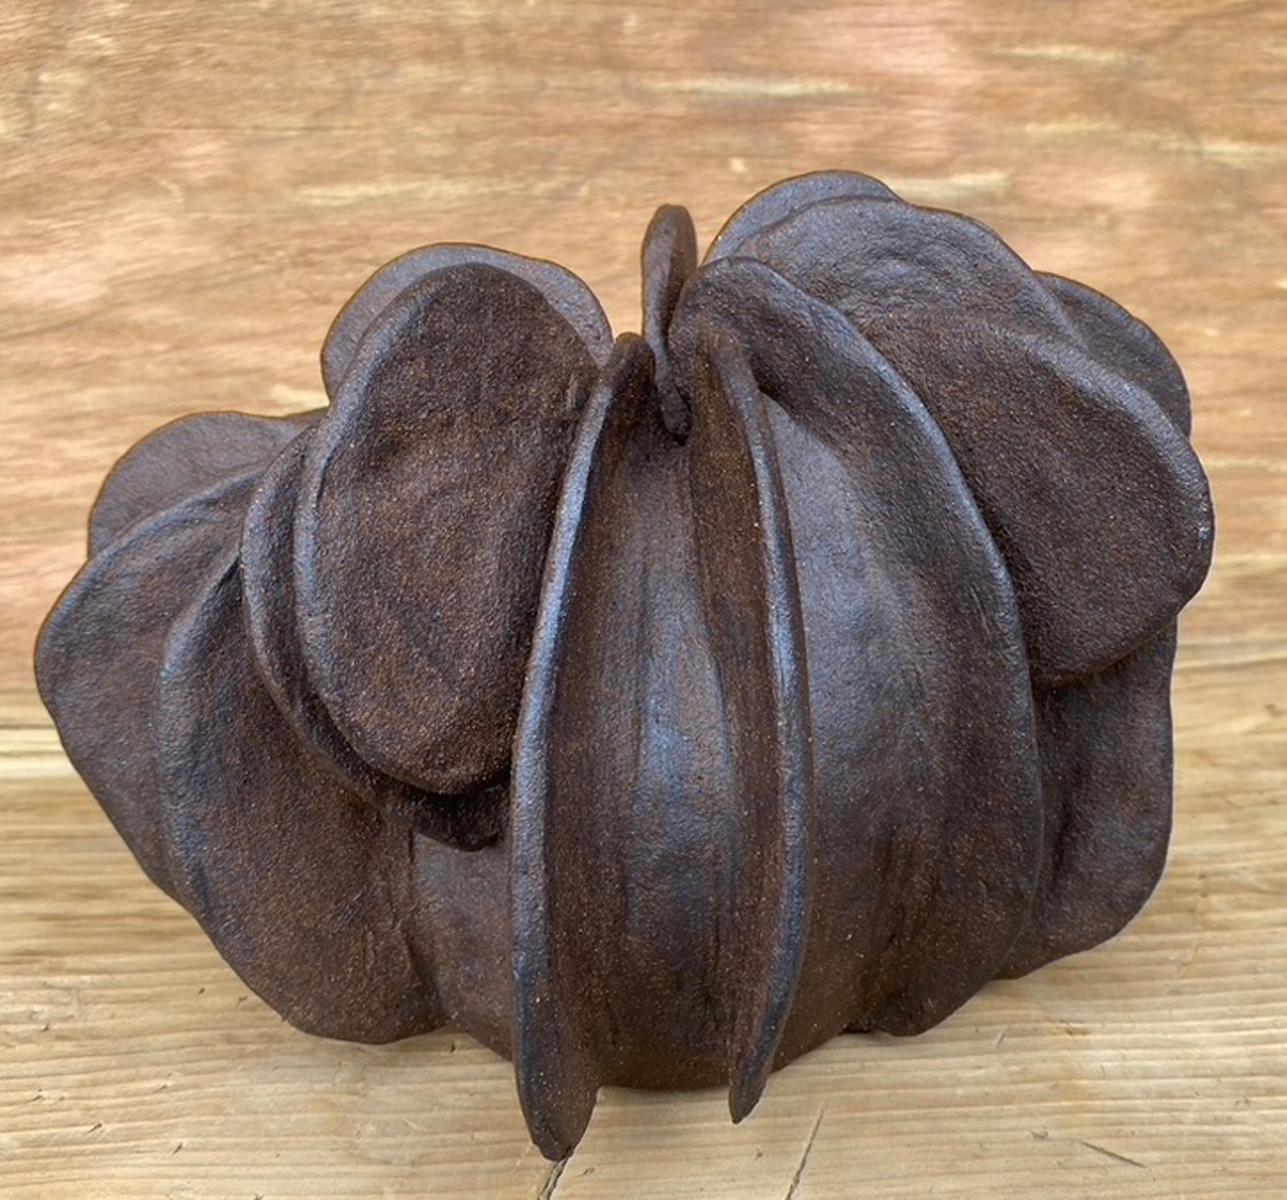 Hand built ceramic vase with large petals. Dark iron rich clay. High fire. Cone 10.
Made by Santa Barbara based artist Sally Terrell. This particular one is part of a series with two other ceramics, see close up photos. Sold separately.